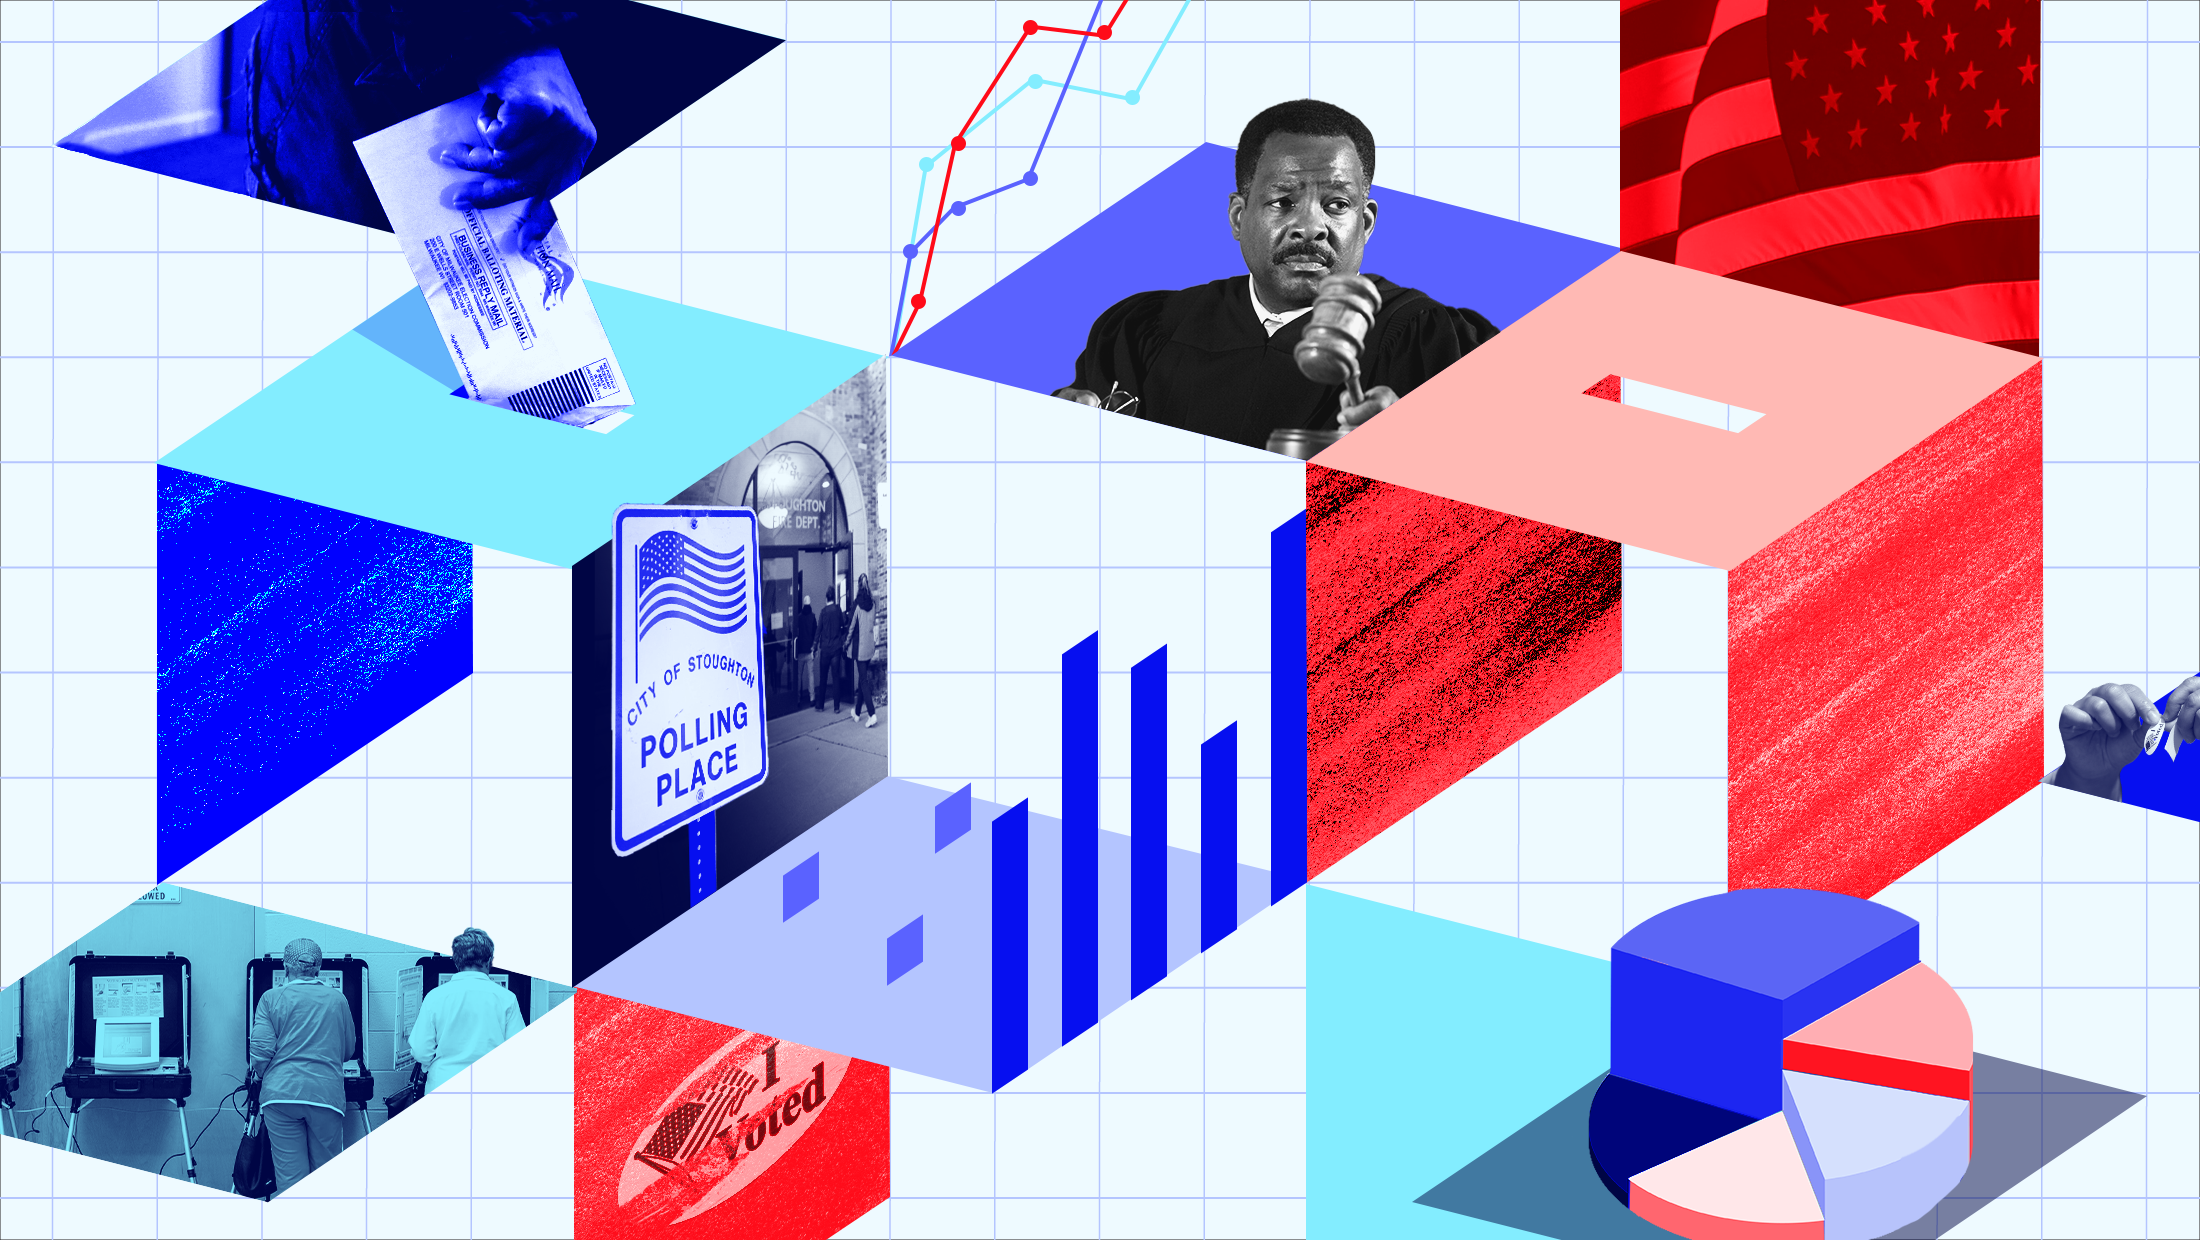 Light blue background with dark blue lines on a graph paper background. Overlaying the graph paper background is a collage of red, teal and dark blue geometric-shaped images. Images include a picture of an American flag, a polling place, an “I Voted” sticker, a sign that says “Polling Place,” a male judge holding a gavel and a multi-colored 3-D pie chart with segments colored dark blue, red, navy blue, light red and periwinkle in the bottom right-hand corner of the graphic.